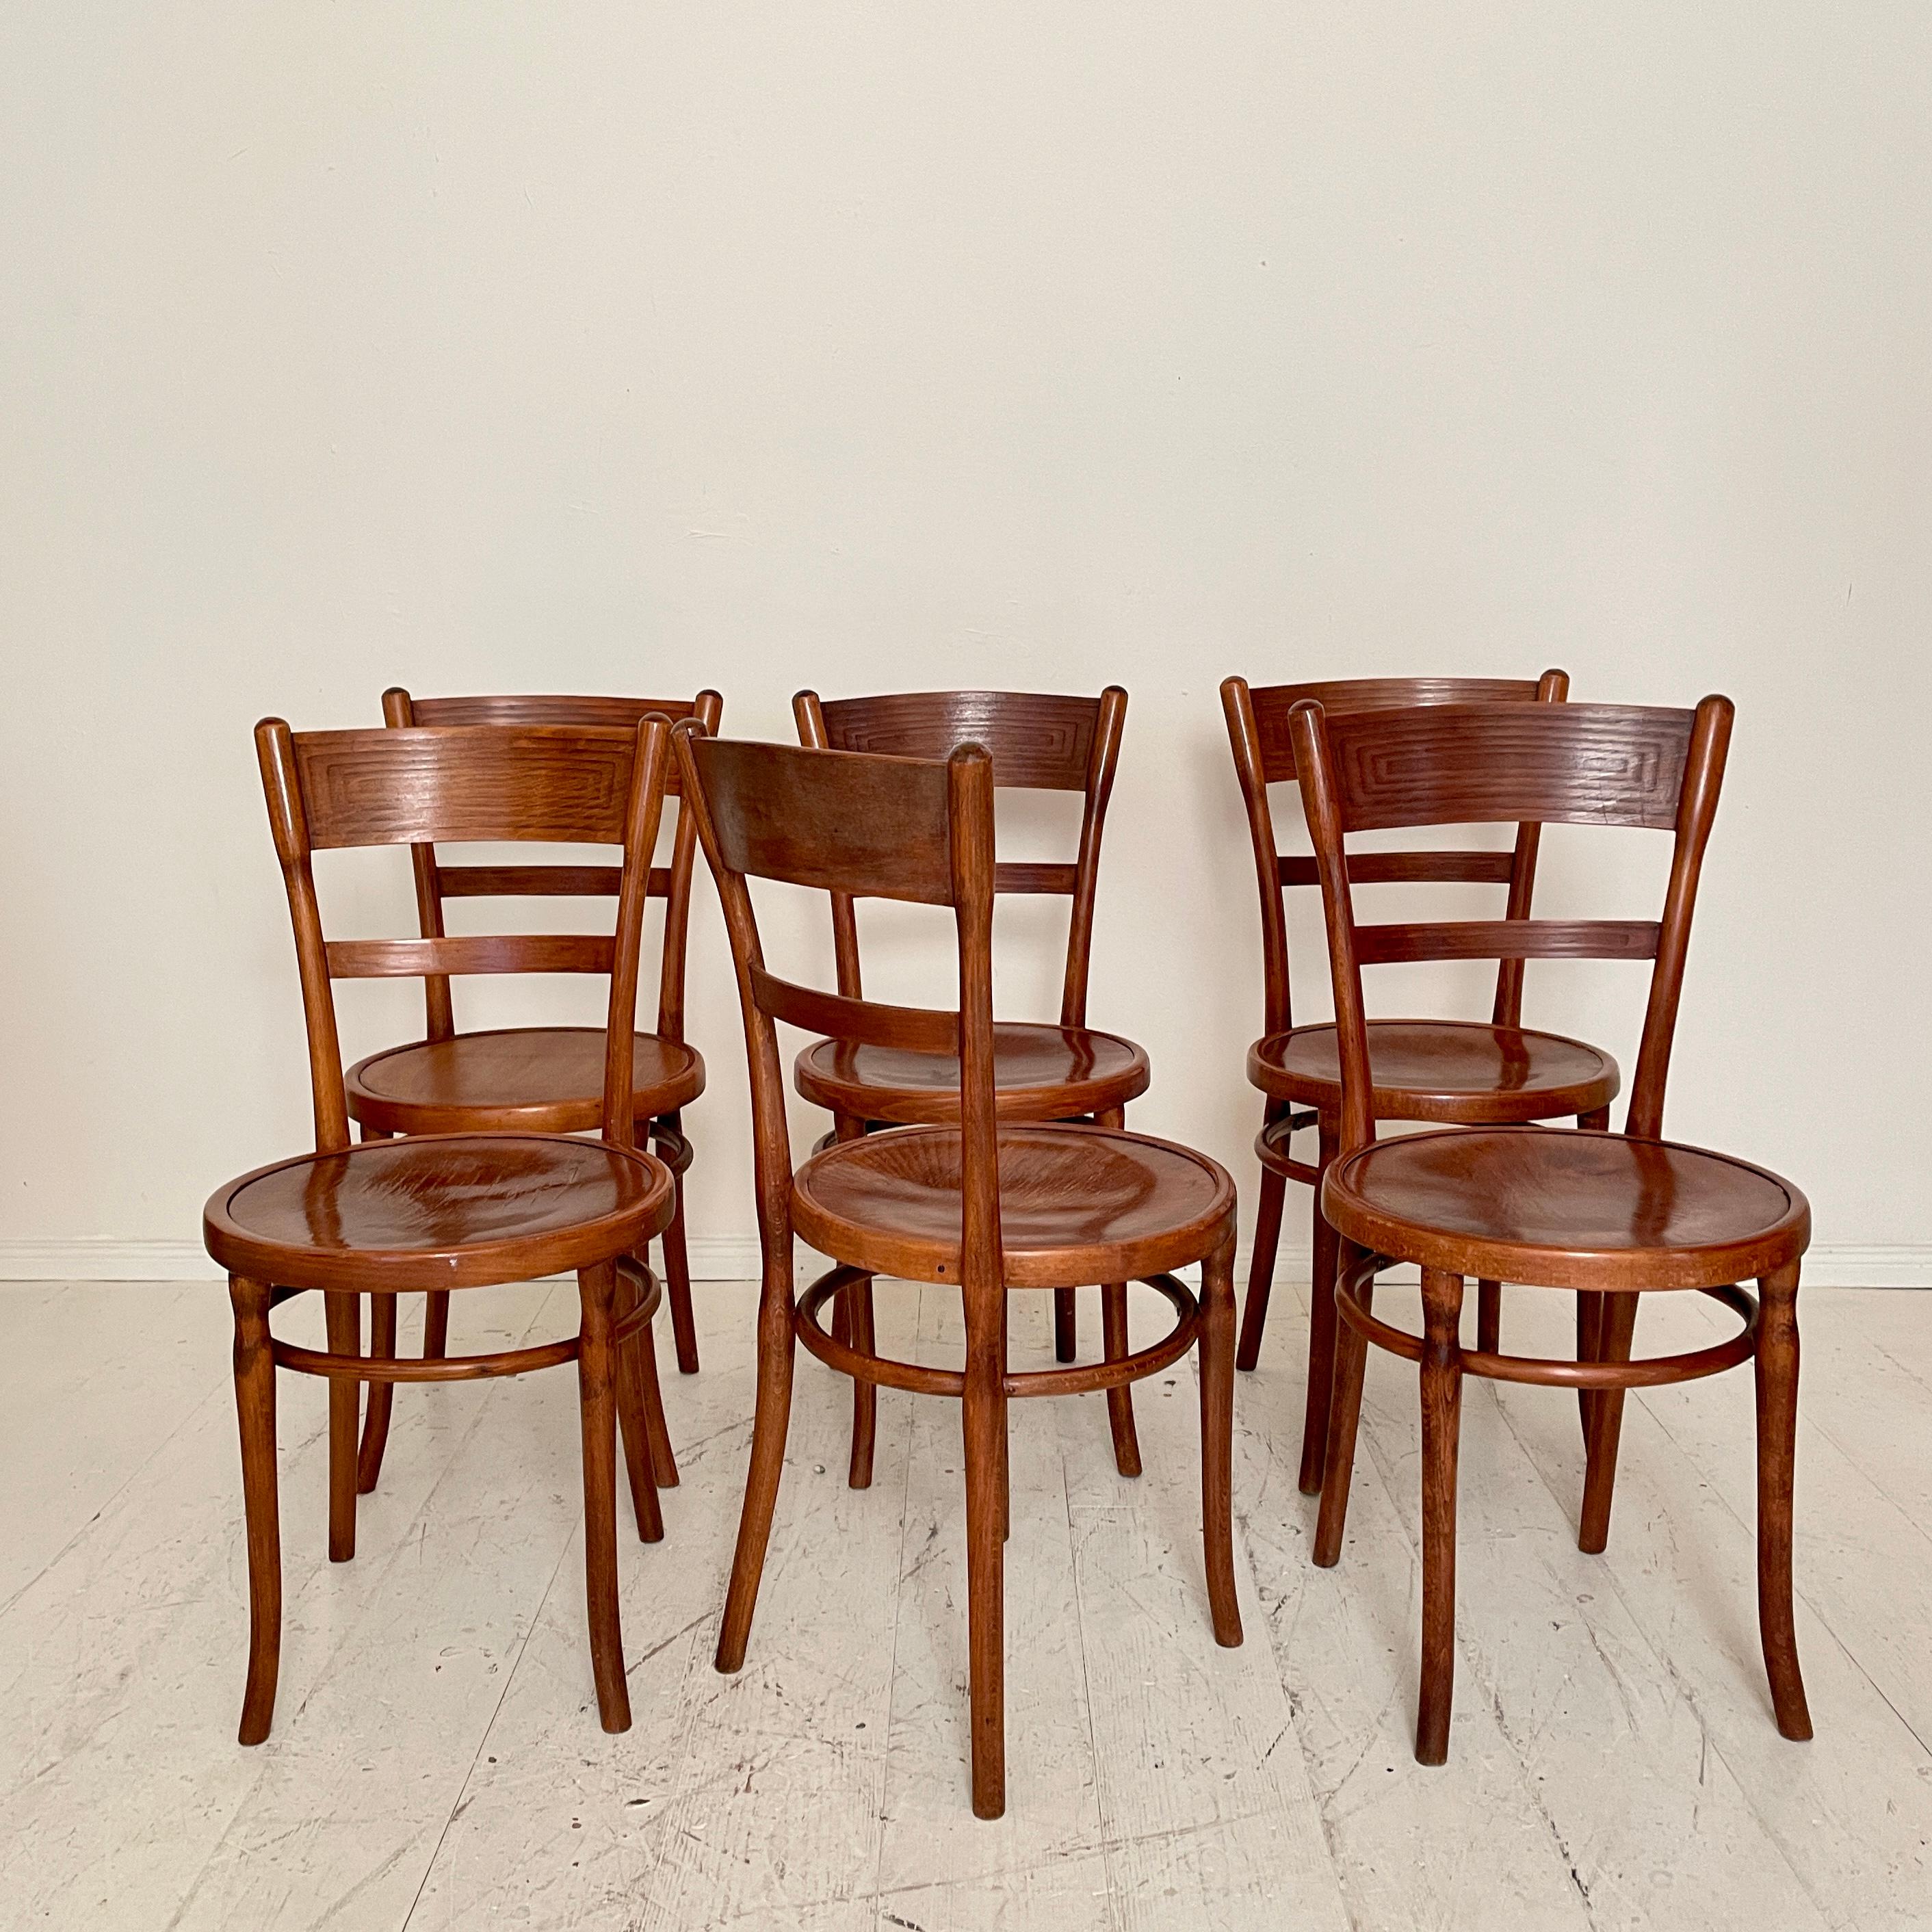 Early 20th Century Set of Six Bentwood Dining Chairs, in Brown Beechwood, Jugendstil Around 1910